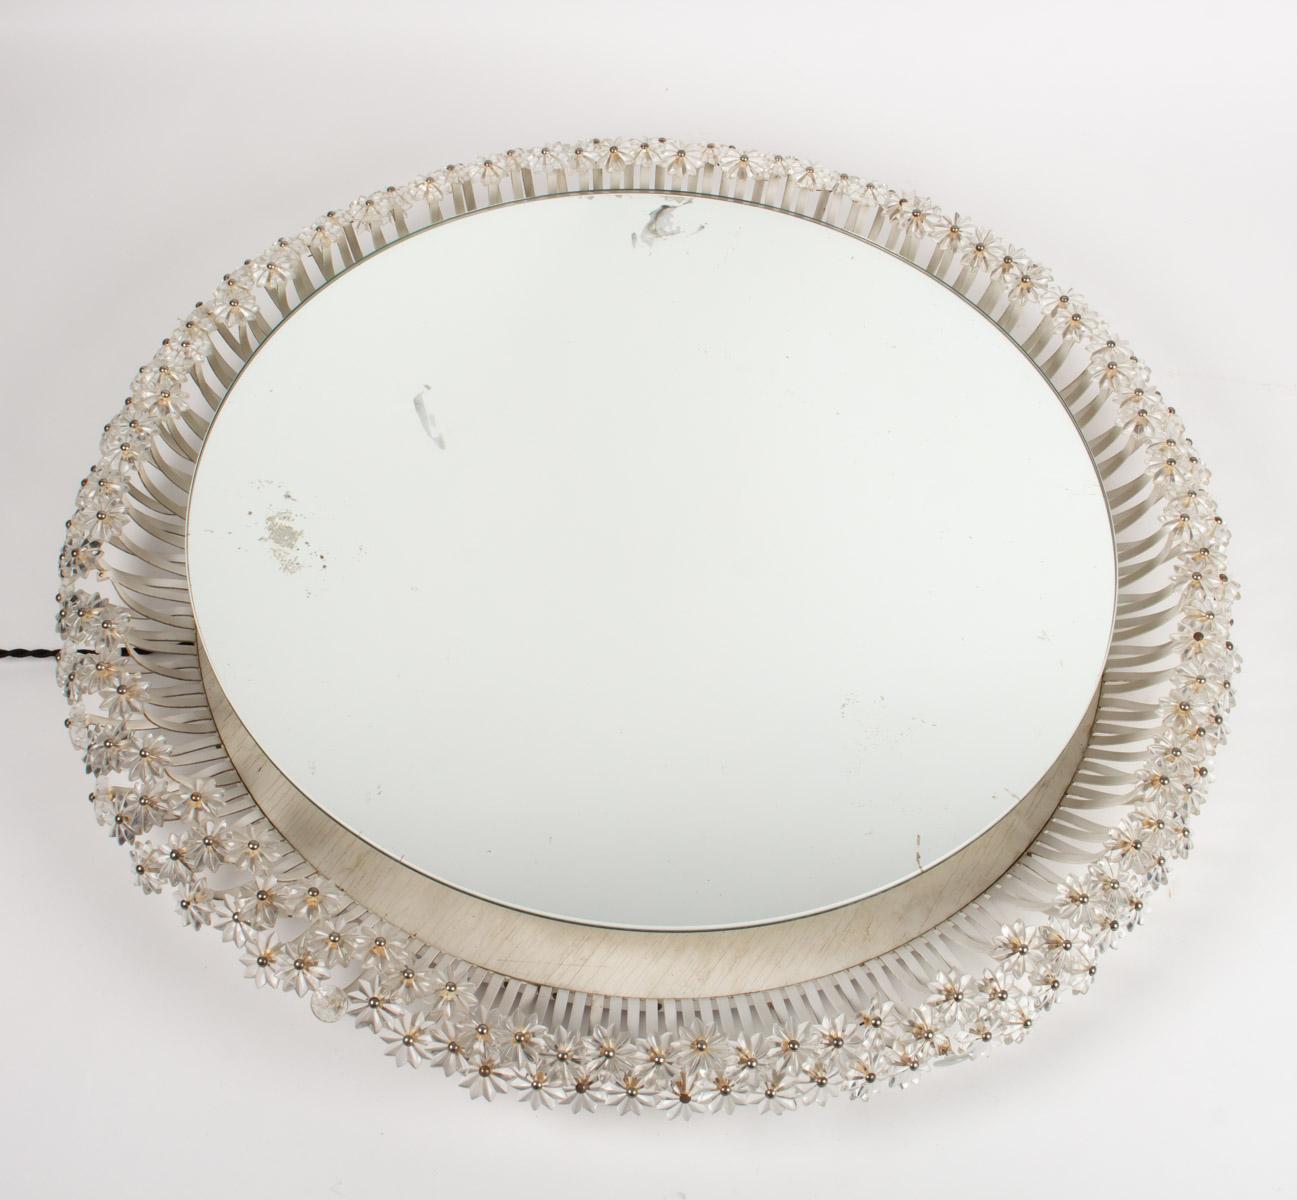 Illuminating mirror, 1950-1960 design in painted metal and glass flowers
Measures: D 69cm, P 8cm.